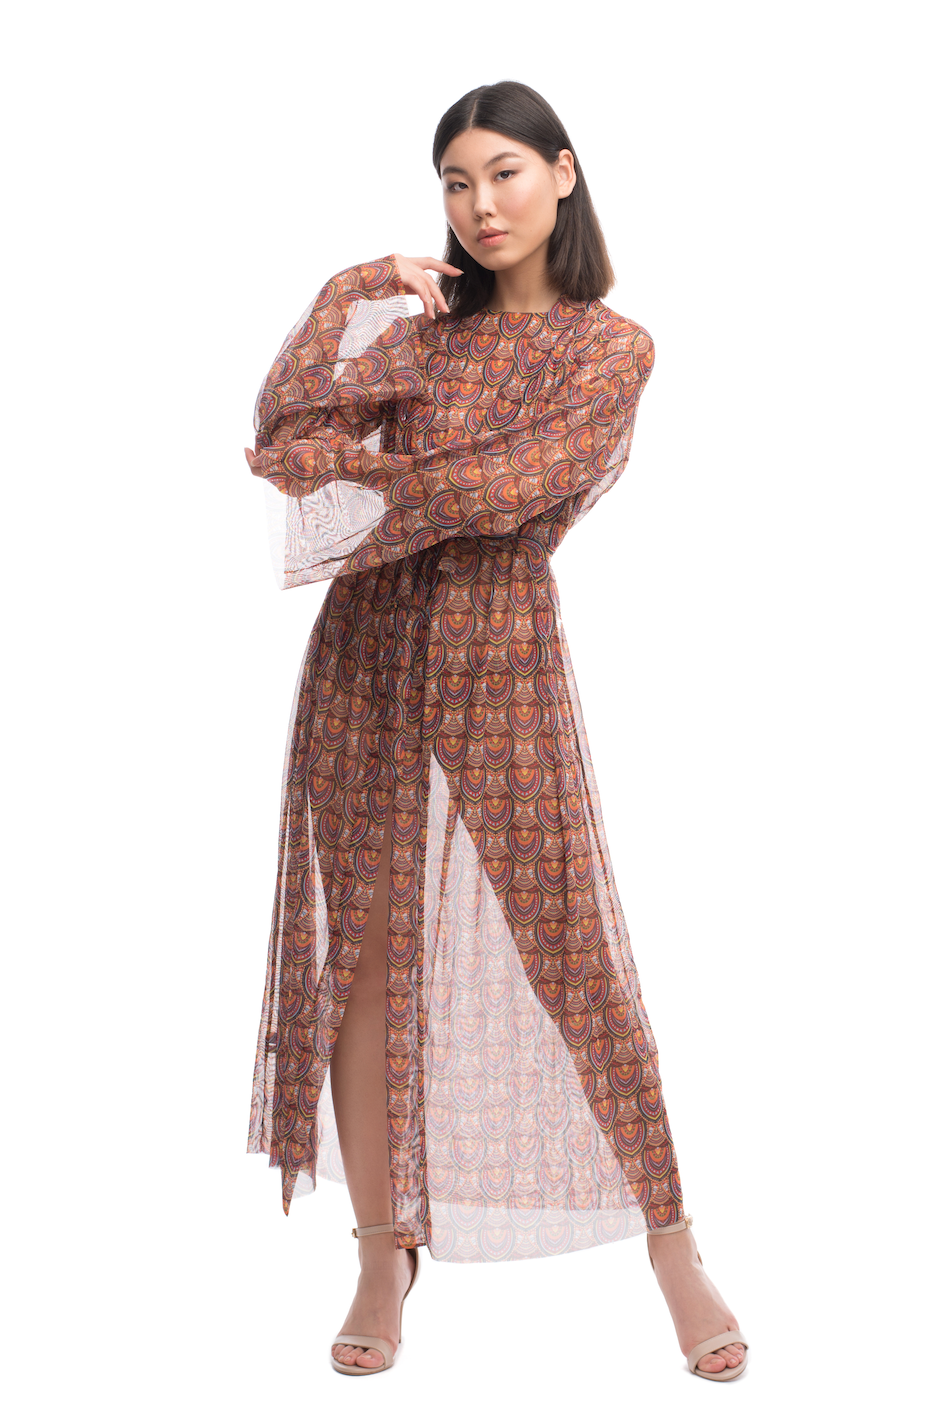 This file offers a concise overview of a sustainable Africa print beach robe with SPF 15 protection and tan-without-tan-lines technology. Ideal for individuals with visual impairments or low-bandwidth connections seeking stylish and sun-safe beach attire